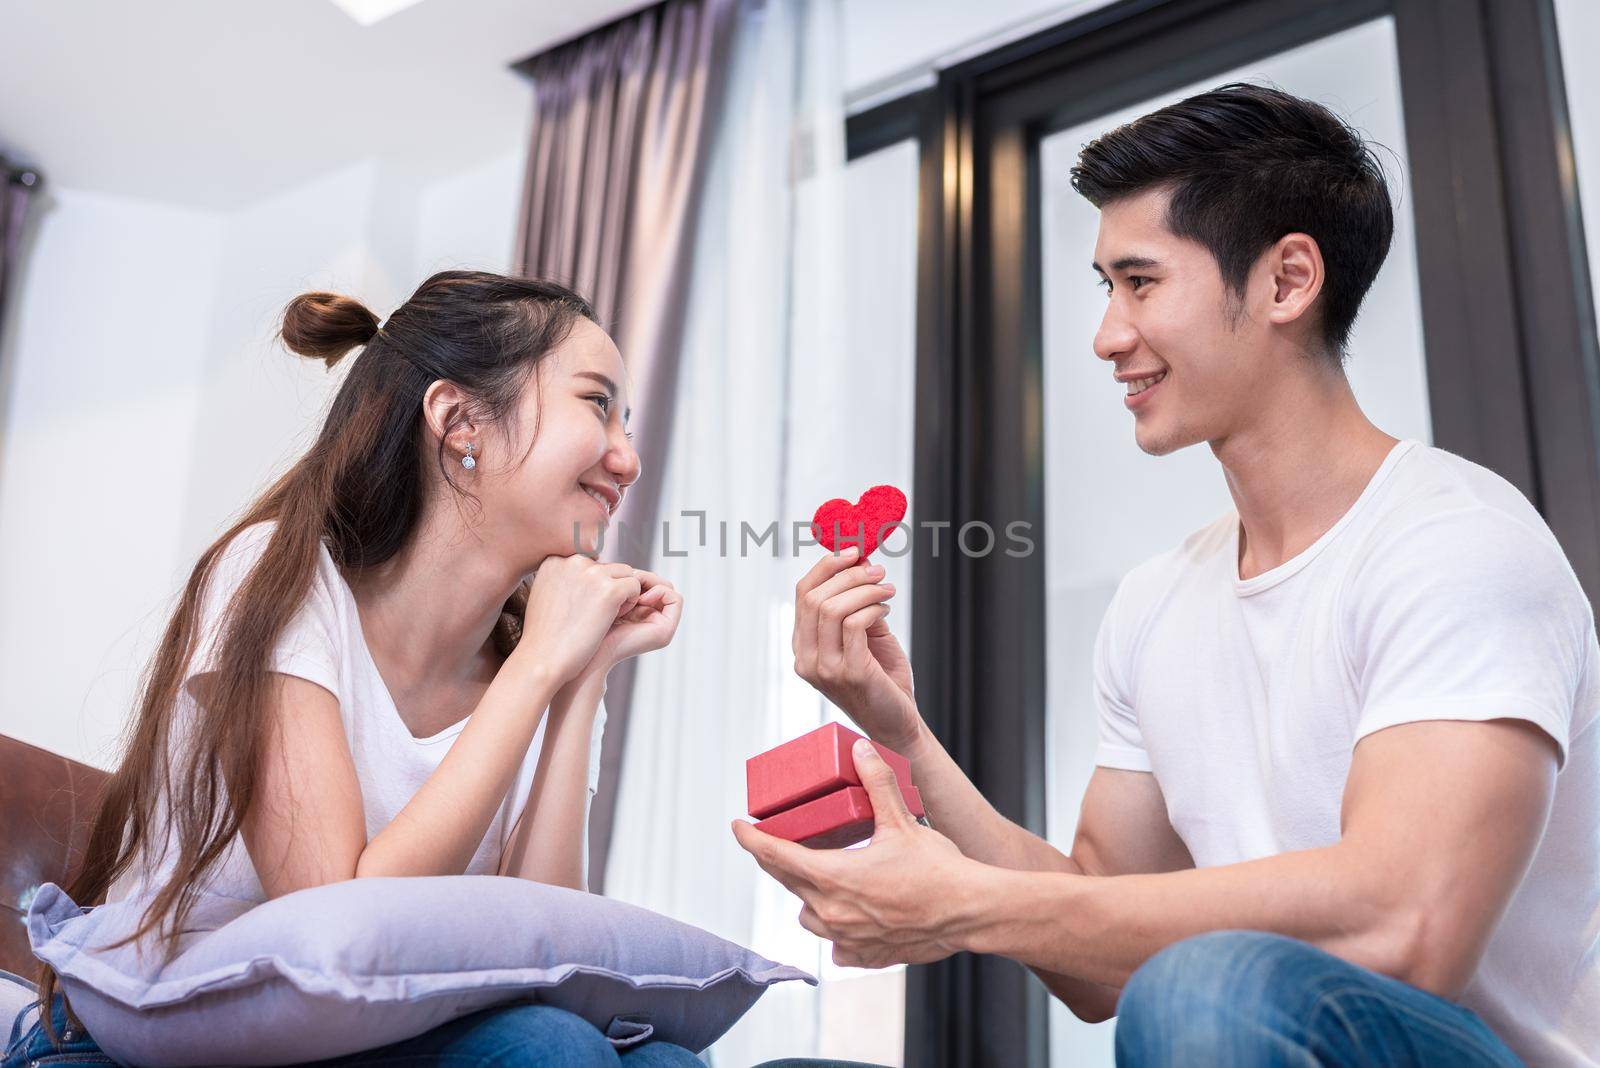 Man holding surprise box and red heart gift to woman on sofa at home in living room Relax and Holiday concept. Happy sweet romantic of young couple in home theme by MiniStocker